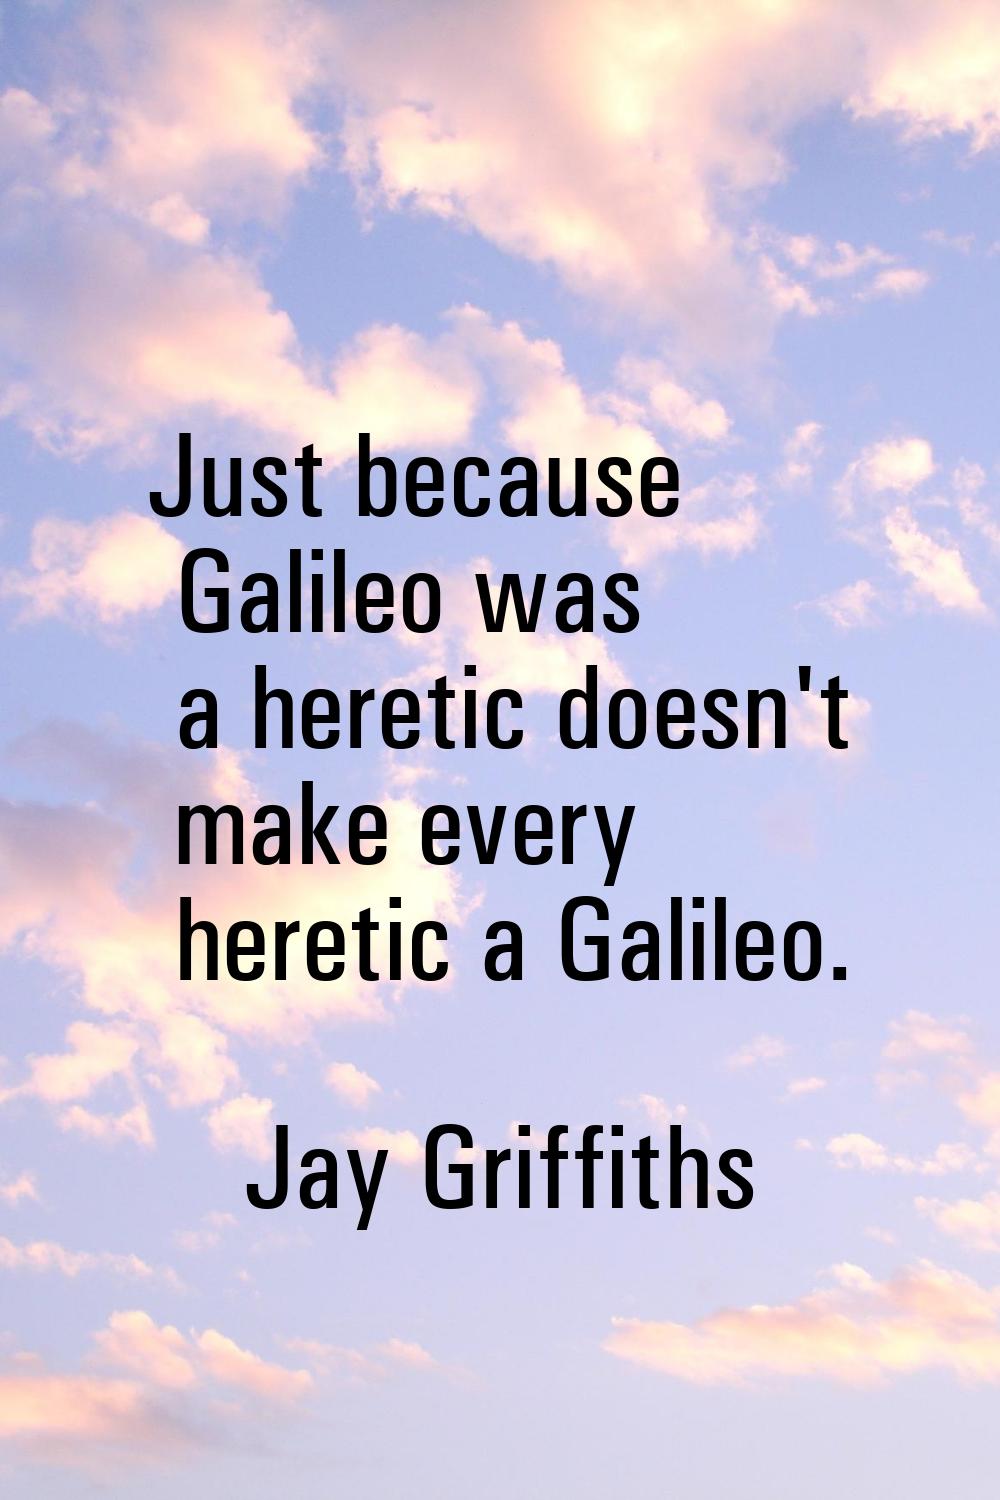 Just because Galileo was a heretic doesn't make every heretic a Galileo.